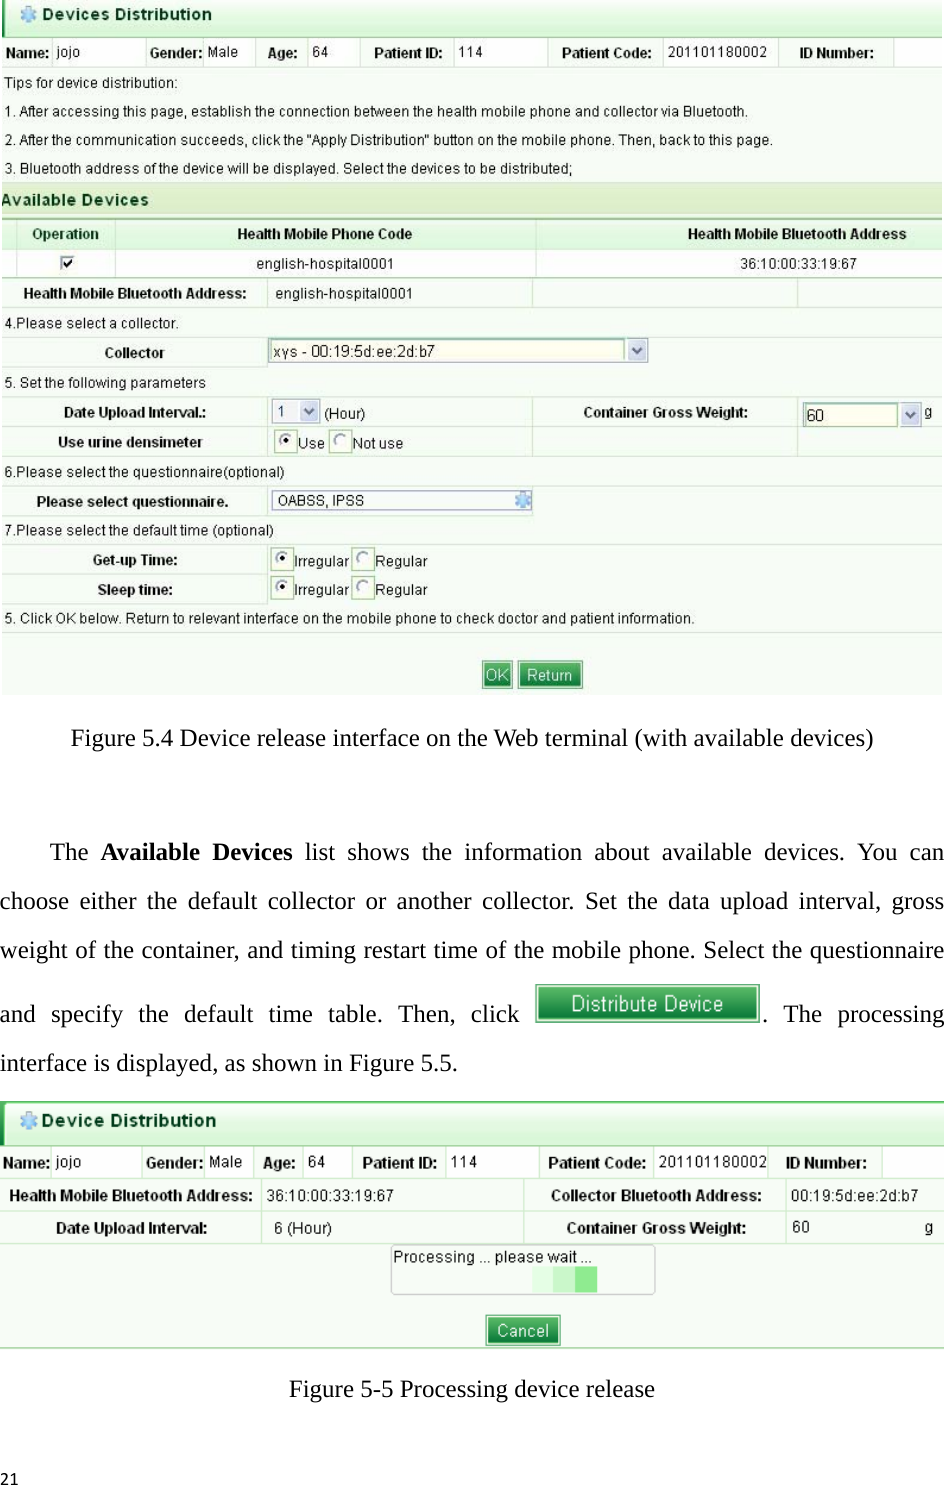 21 Figure 5.4 Device release interface on the Web terminal (with available devices)  The  Available Devices list shows the information about available devices. You can choose either the default collector or another collector. Set the data upload interval, gross weight of the container, and timing restart time of the mobile phone. Select the questionnaire and specify the default time table. Then, click  . The processing interface is displayed, as shown in Figure 5.5.  Figure 5-5 Processing device release   